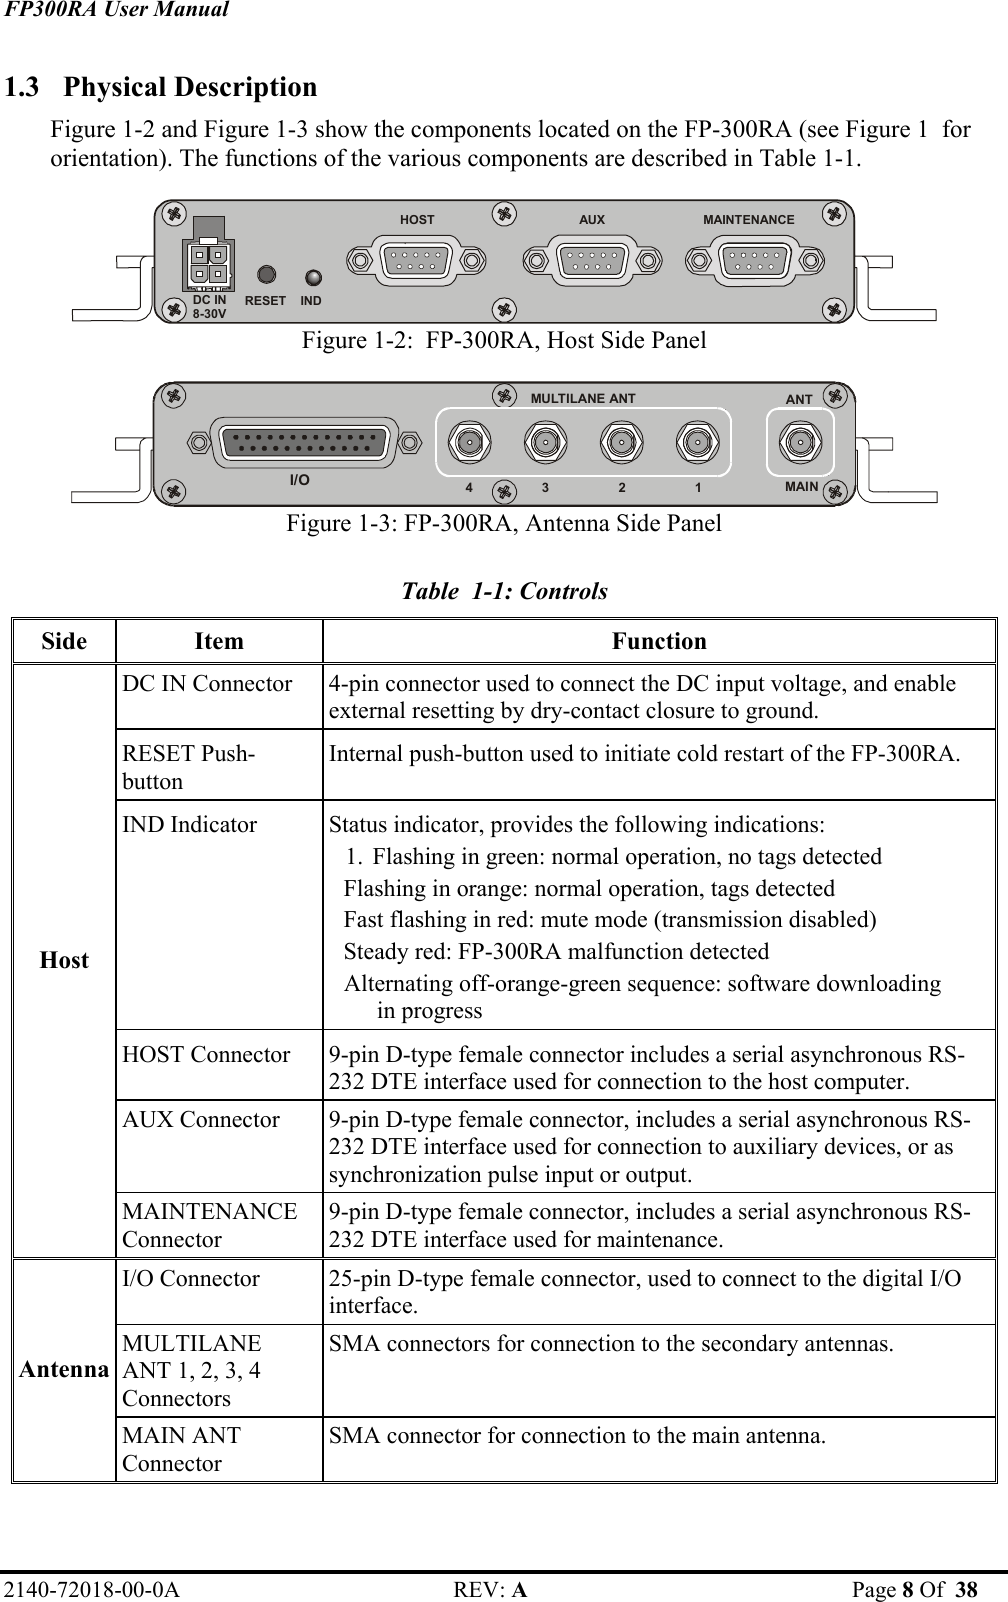 FP300RA User Manual 2140-72018-00-0A REV: A  Page 8 Of  38  1.3 Physical Description Figure 1-2 and Figure 1-3 show the components located on the FP-300RA (see Figure 1  for orientation). The functions of the various components are described in Table 1-1.  DC IN 8-30V AUXHOST                      MAINTENANCE RESET    IND  Figure 1-2:  FP-300RA, Host Side Panel 4                   3                   2                   1I/OMULTILANE ANT ANTMAIN Figure 1-3: FP-300RA, Antenna Side Panel  Table  1-1: Controls Side Item  Function DC IN Connector   4-pin connector used to connect the DC input voltage, and enable external resetting by dry-contact closure to ground. RESET Push-button Internal push-button used to initiate cold restart of the FP-300RA.  IND Indicator   Status indicator, provides the following indications: 1. Flashing in green: normal operation, no tags detected Flashing in orange: normal operation, tags detected Fast flashing in red: mute mode (transmission disabled) Steady red: FP-300RA malfunction detected Alternating off-orange-green sequence: software downloading in progress HOST Connector   9-pin D-type female connector includes a serial asynchronous RS-232 DTE interface used for connection to the host computer. AUX Connector   9-pin D-type female connector, includes a serial asynchronous RS-232 DTE interface used for connection to auxiliary devices, or as synchronization pulse input or output. Host MAINTENANCE Connector  9-pin D-type female connector, includes a serial asynchronous RS-232 DTE interface used for maintenance. I/O Connector   25-pin D-type female connector, used to connect to the digital I/O interface. MULTILANE ANT 1, 2, 3, 4 Connectors  SMA connectors for connection to the secondary antennas. Antenna MAIN ANT Connector  SMA connector for connection to the main antenna.  